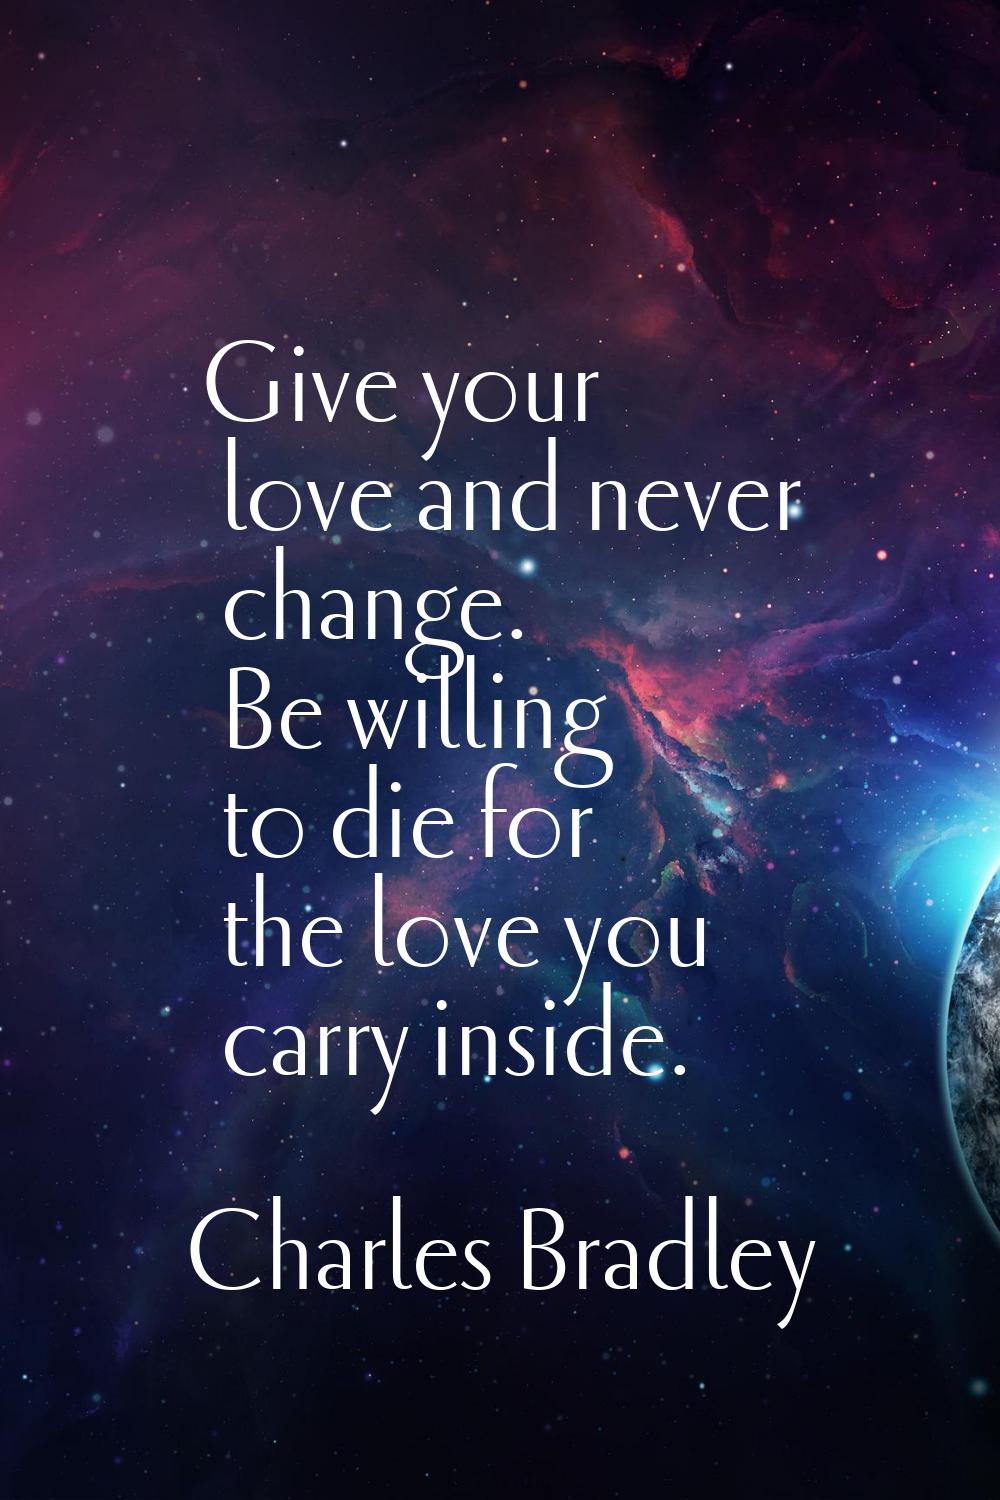 Give your love and never change. Be willing to die for the love you carry inside.